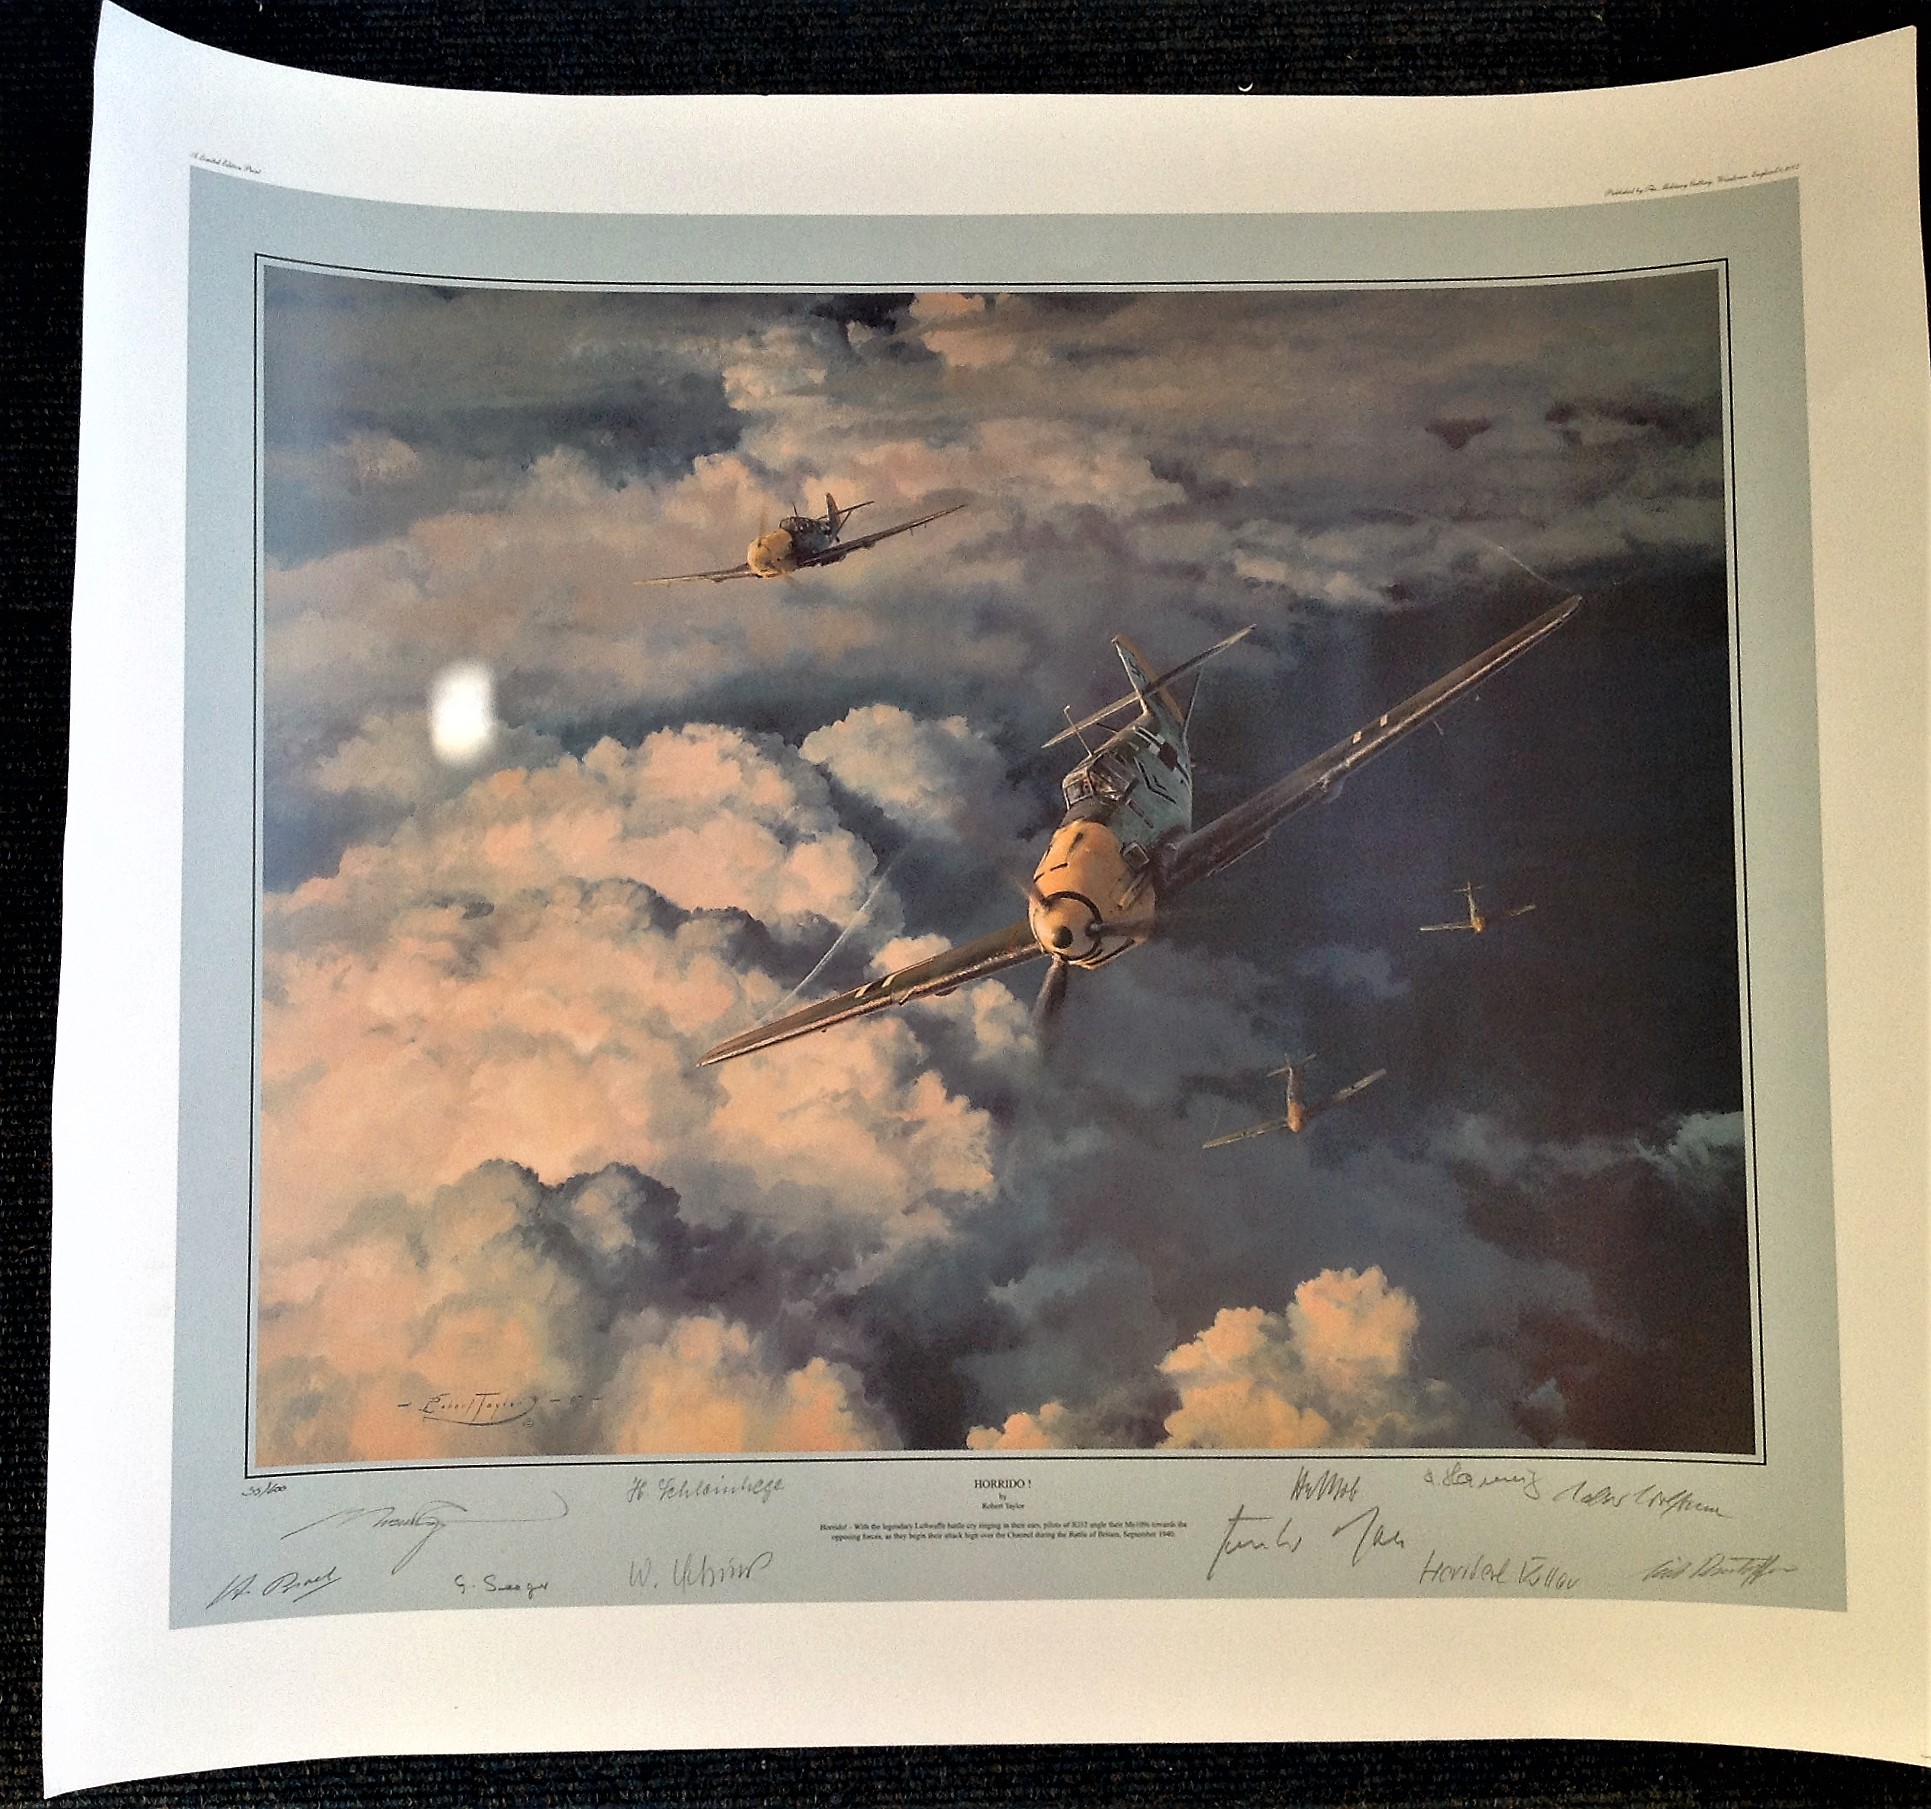 Robert Taylor 27x30 Horrido 35 600 Luftwaffe Aces Edition print with 10 Luftwaffe fighter Ace